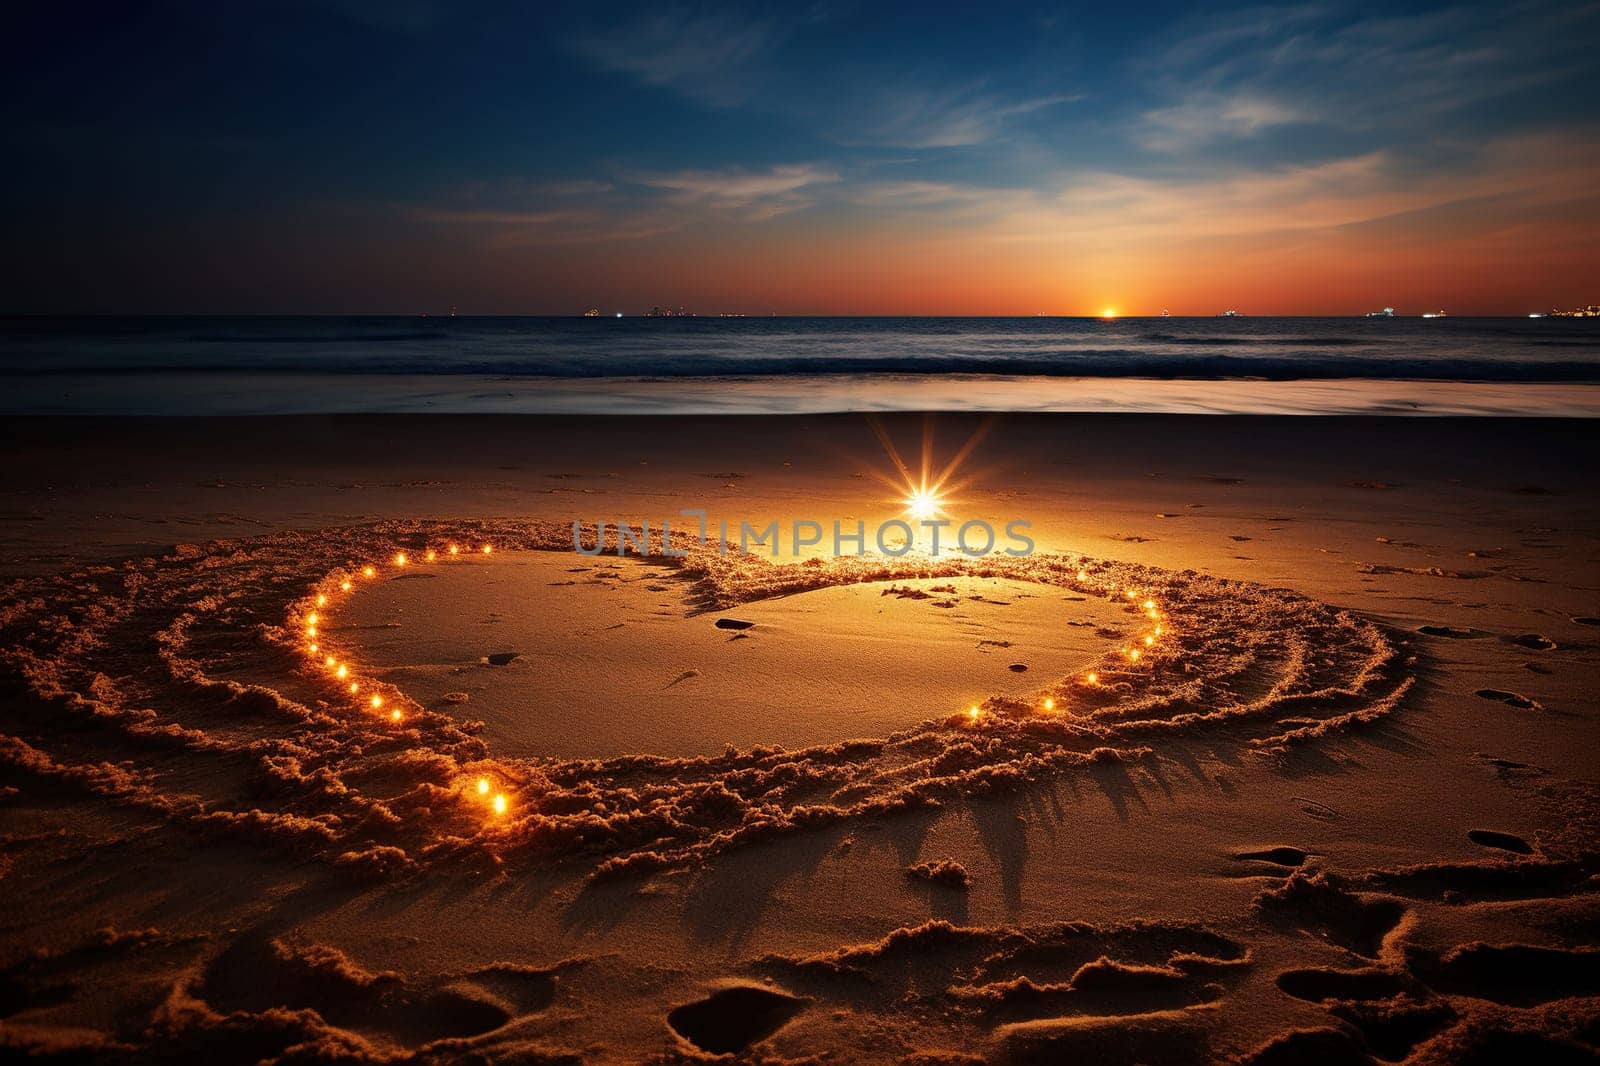 Heart shape made of lights on the beach at sunset. Generated by artificial intelligence by Vovmar